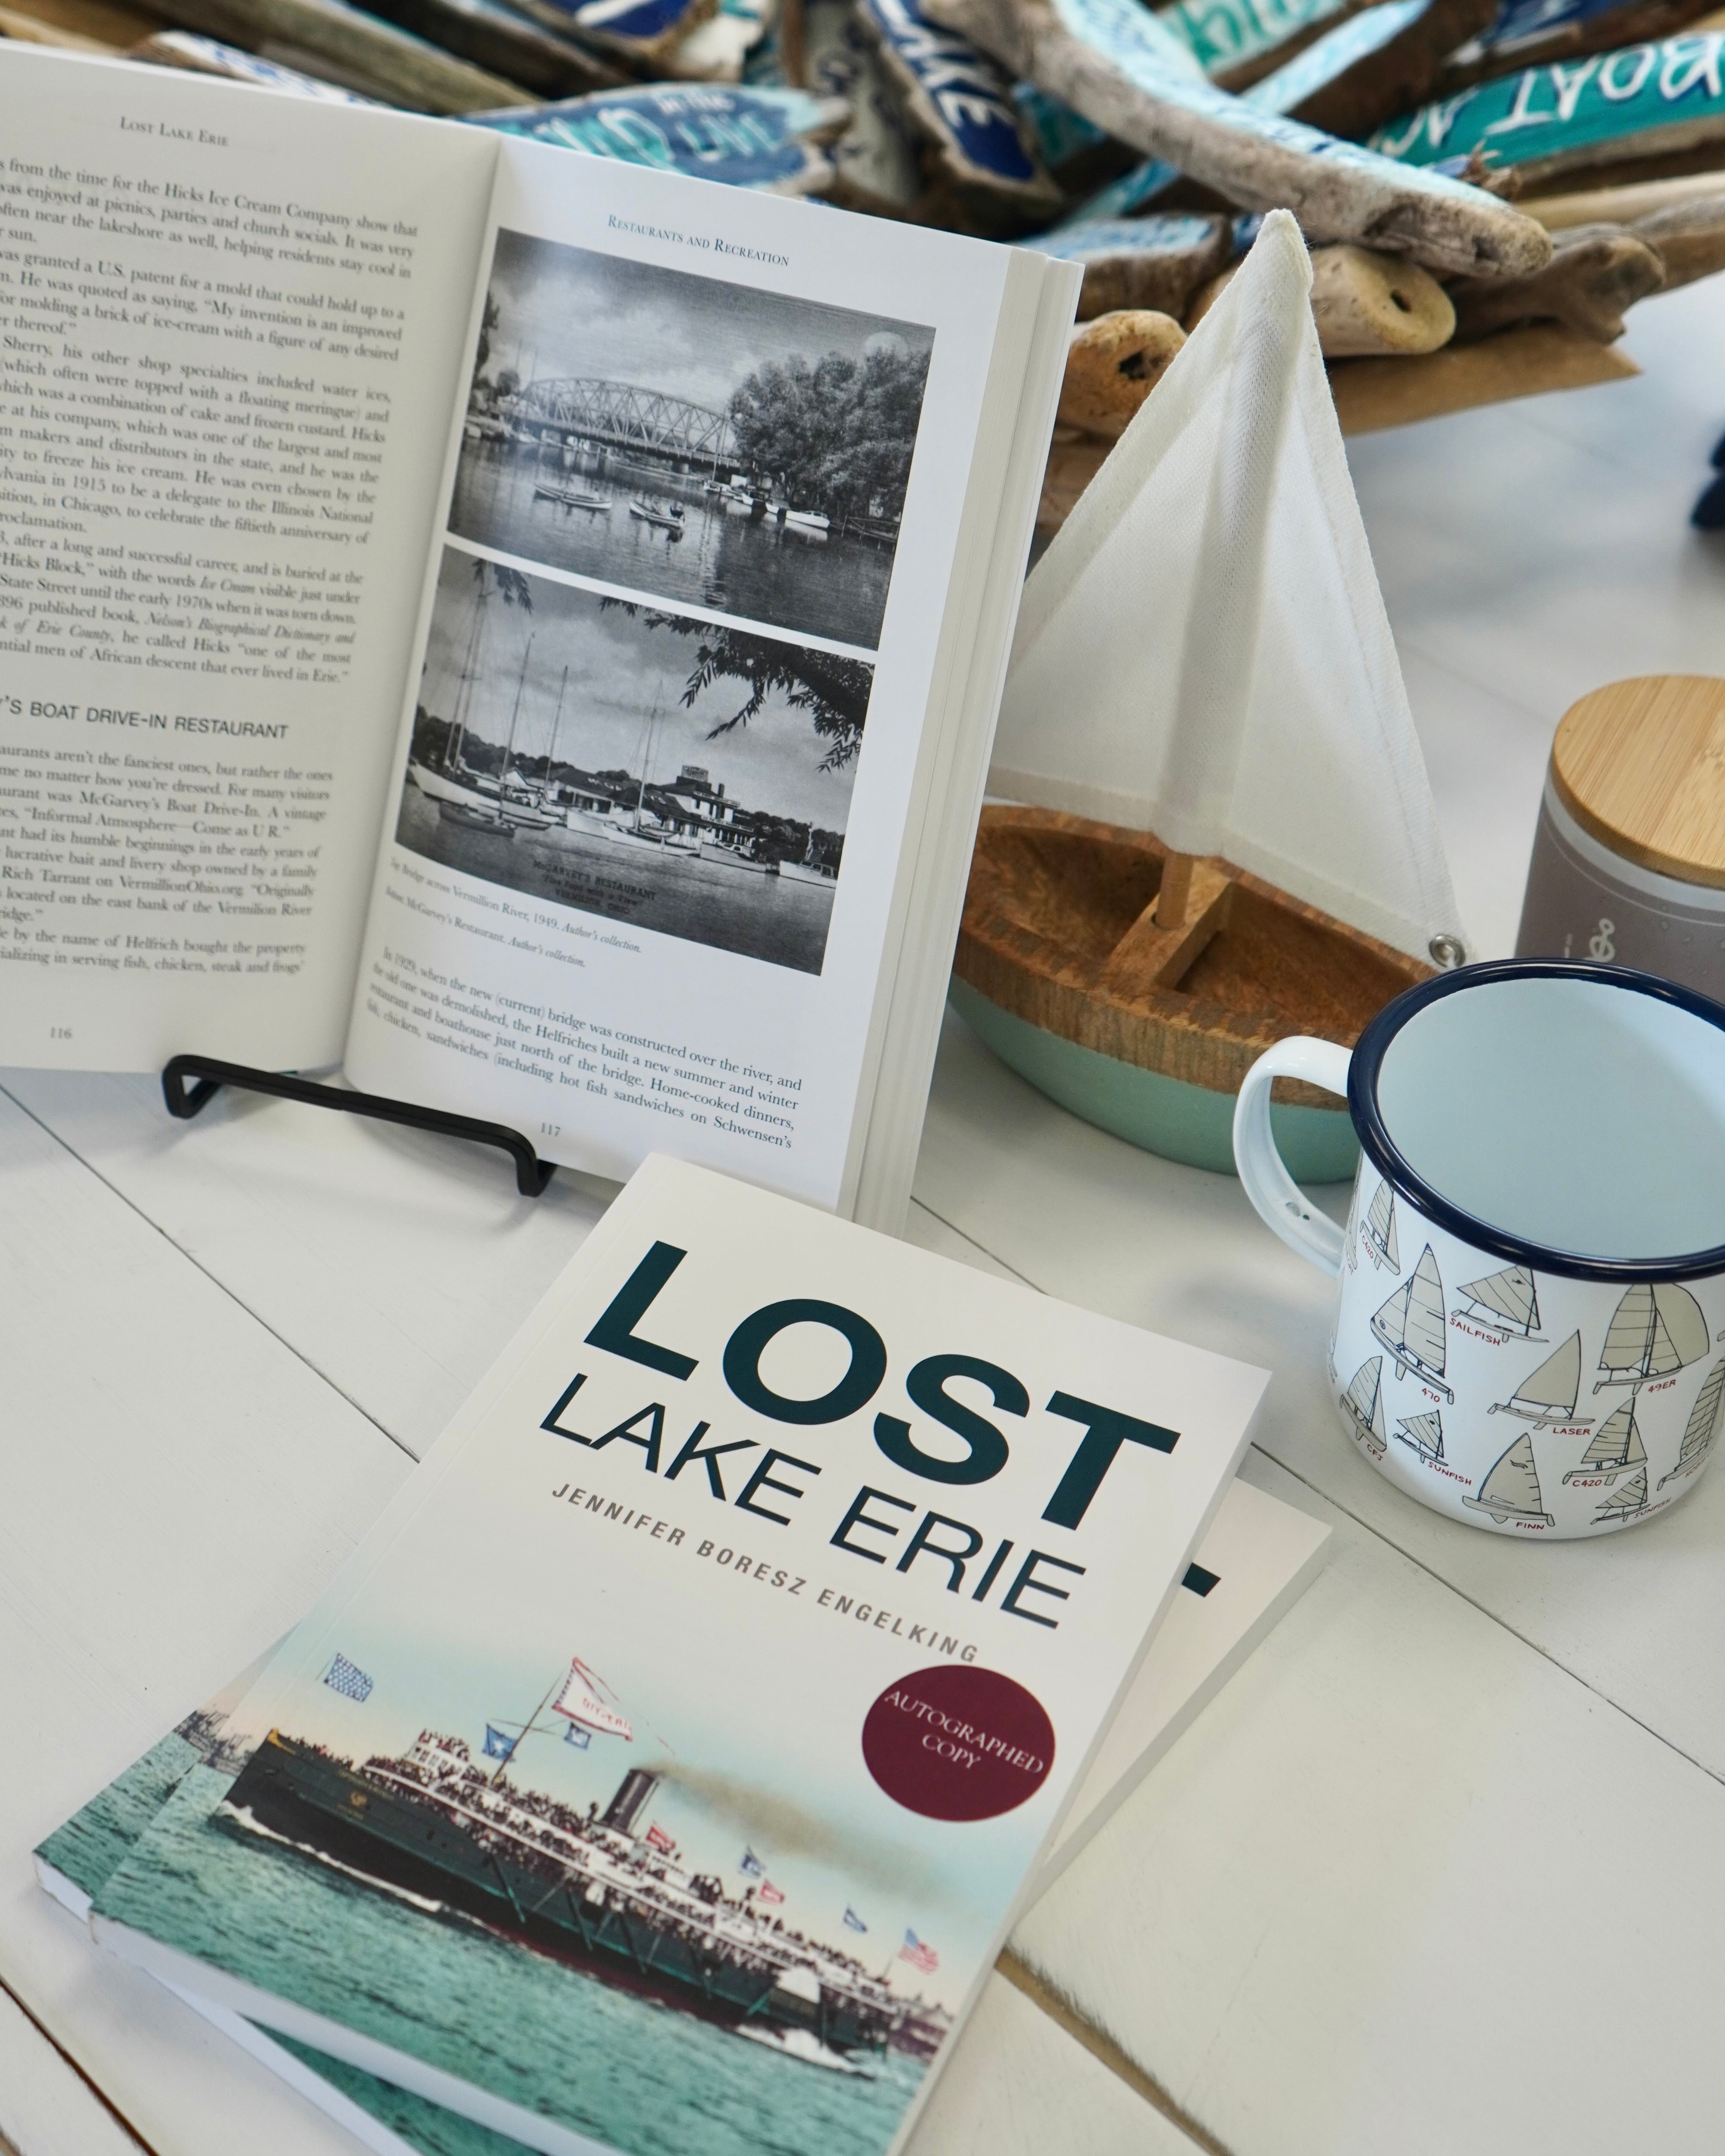 “Lost Lake Erie” Signed Book